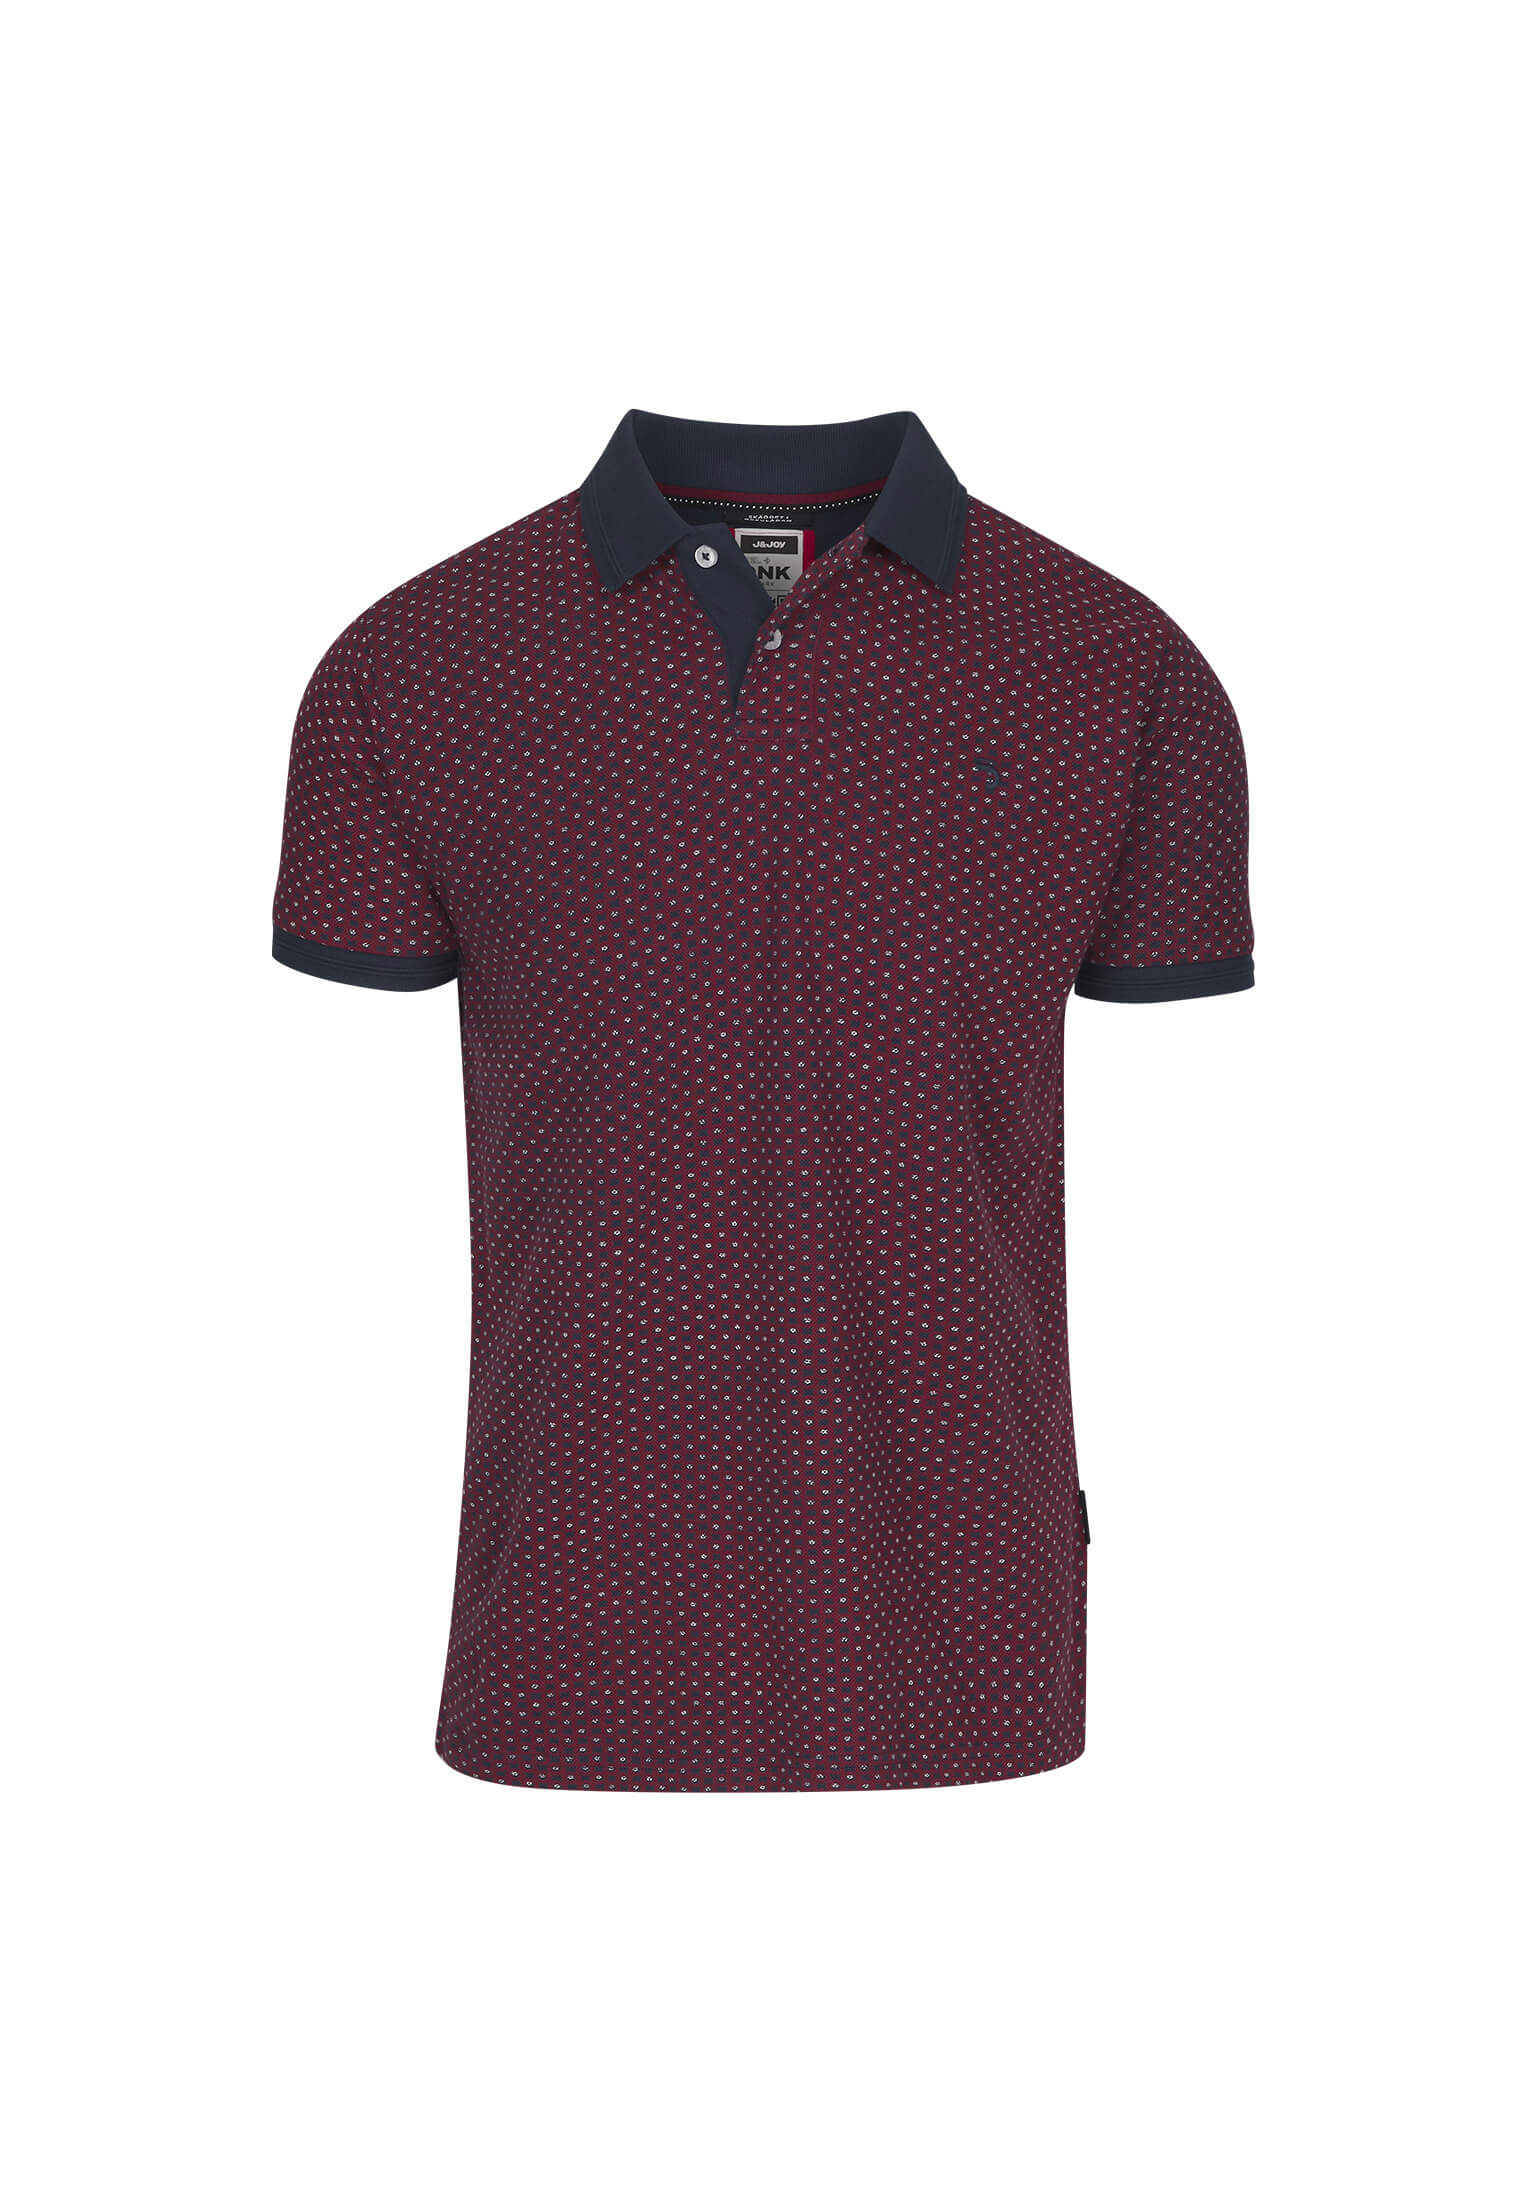 Polo Homme 23 Fjord Red Dots Chili Pepper | J&JOY.